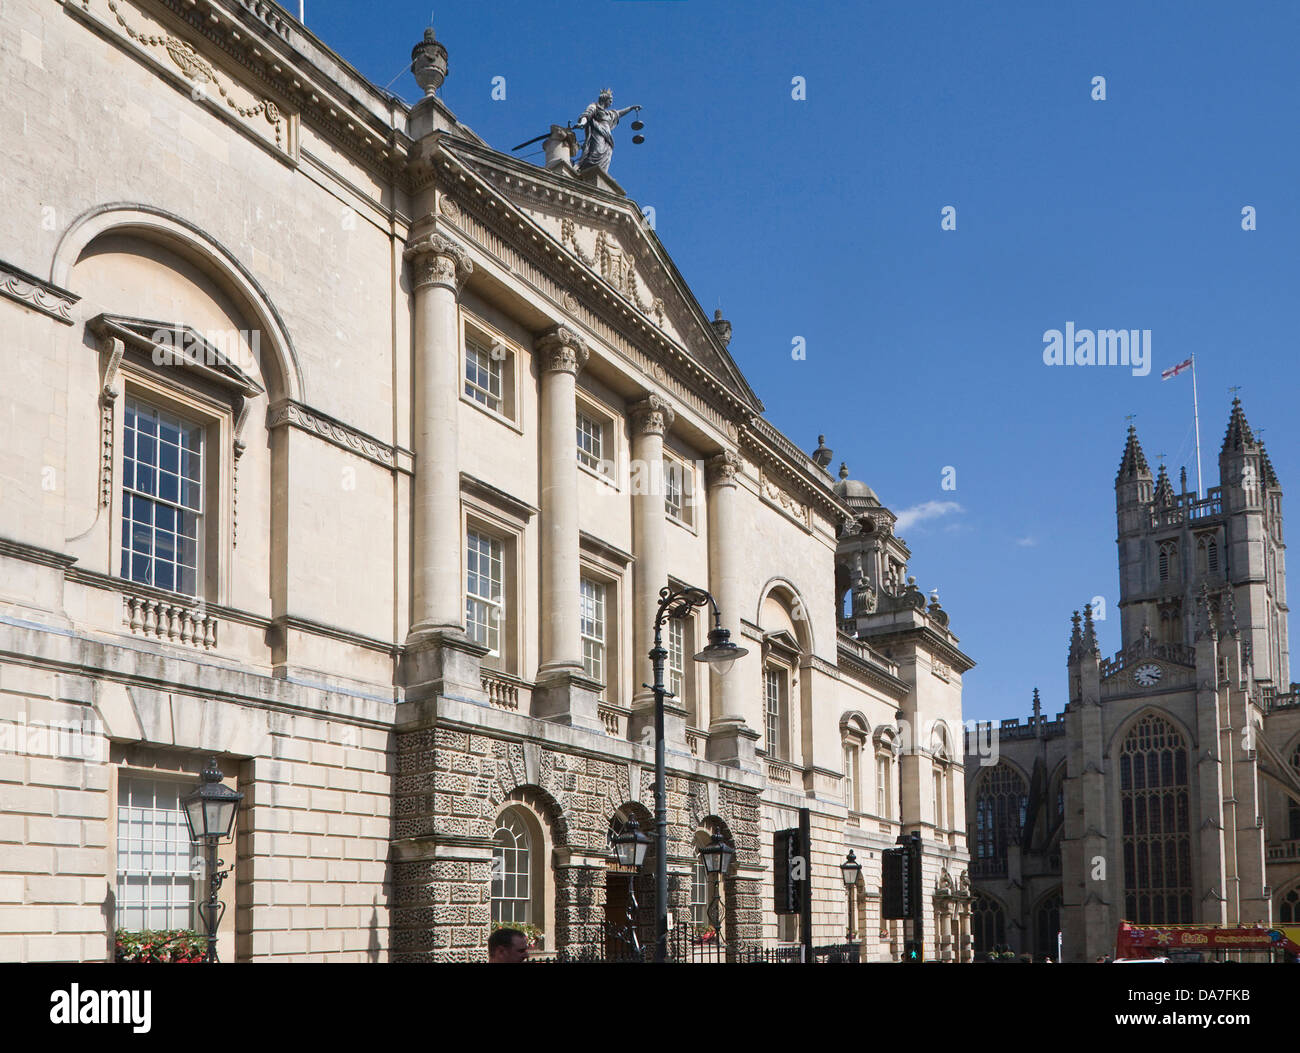 The Guildhall in Bath, Somerset, England built between 1775 and 1778 by Thomas Baldwin Stock Photo